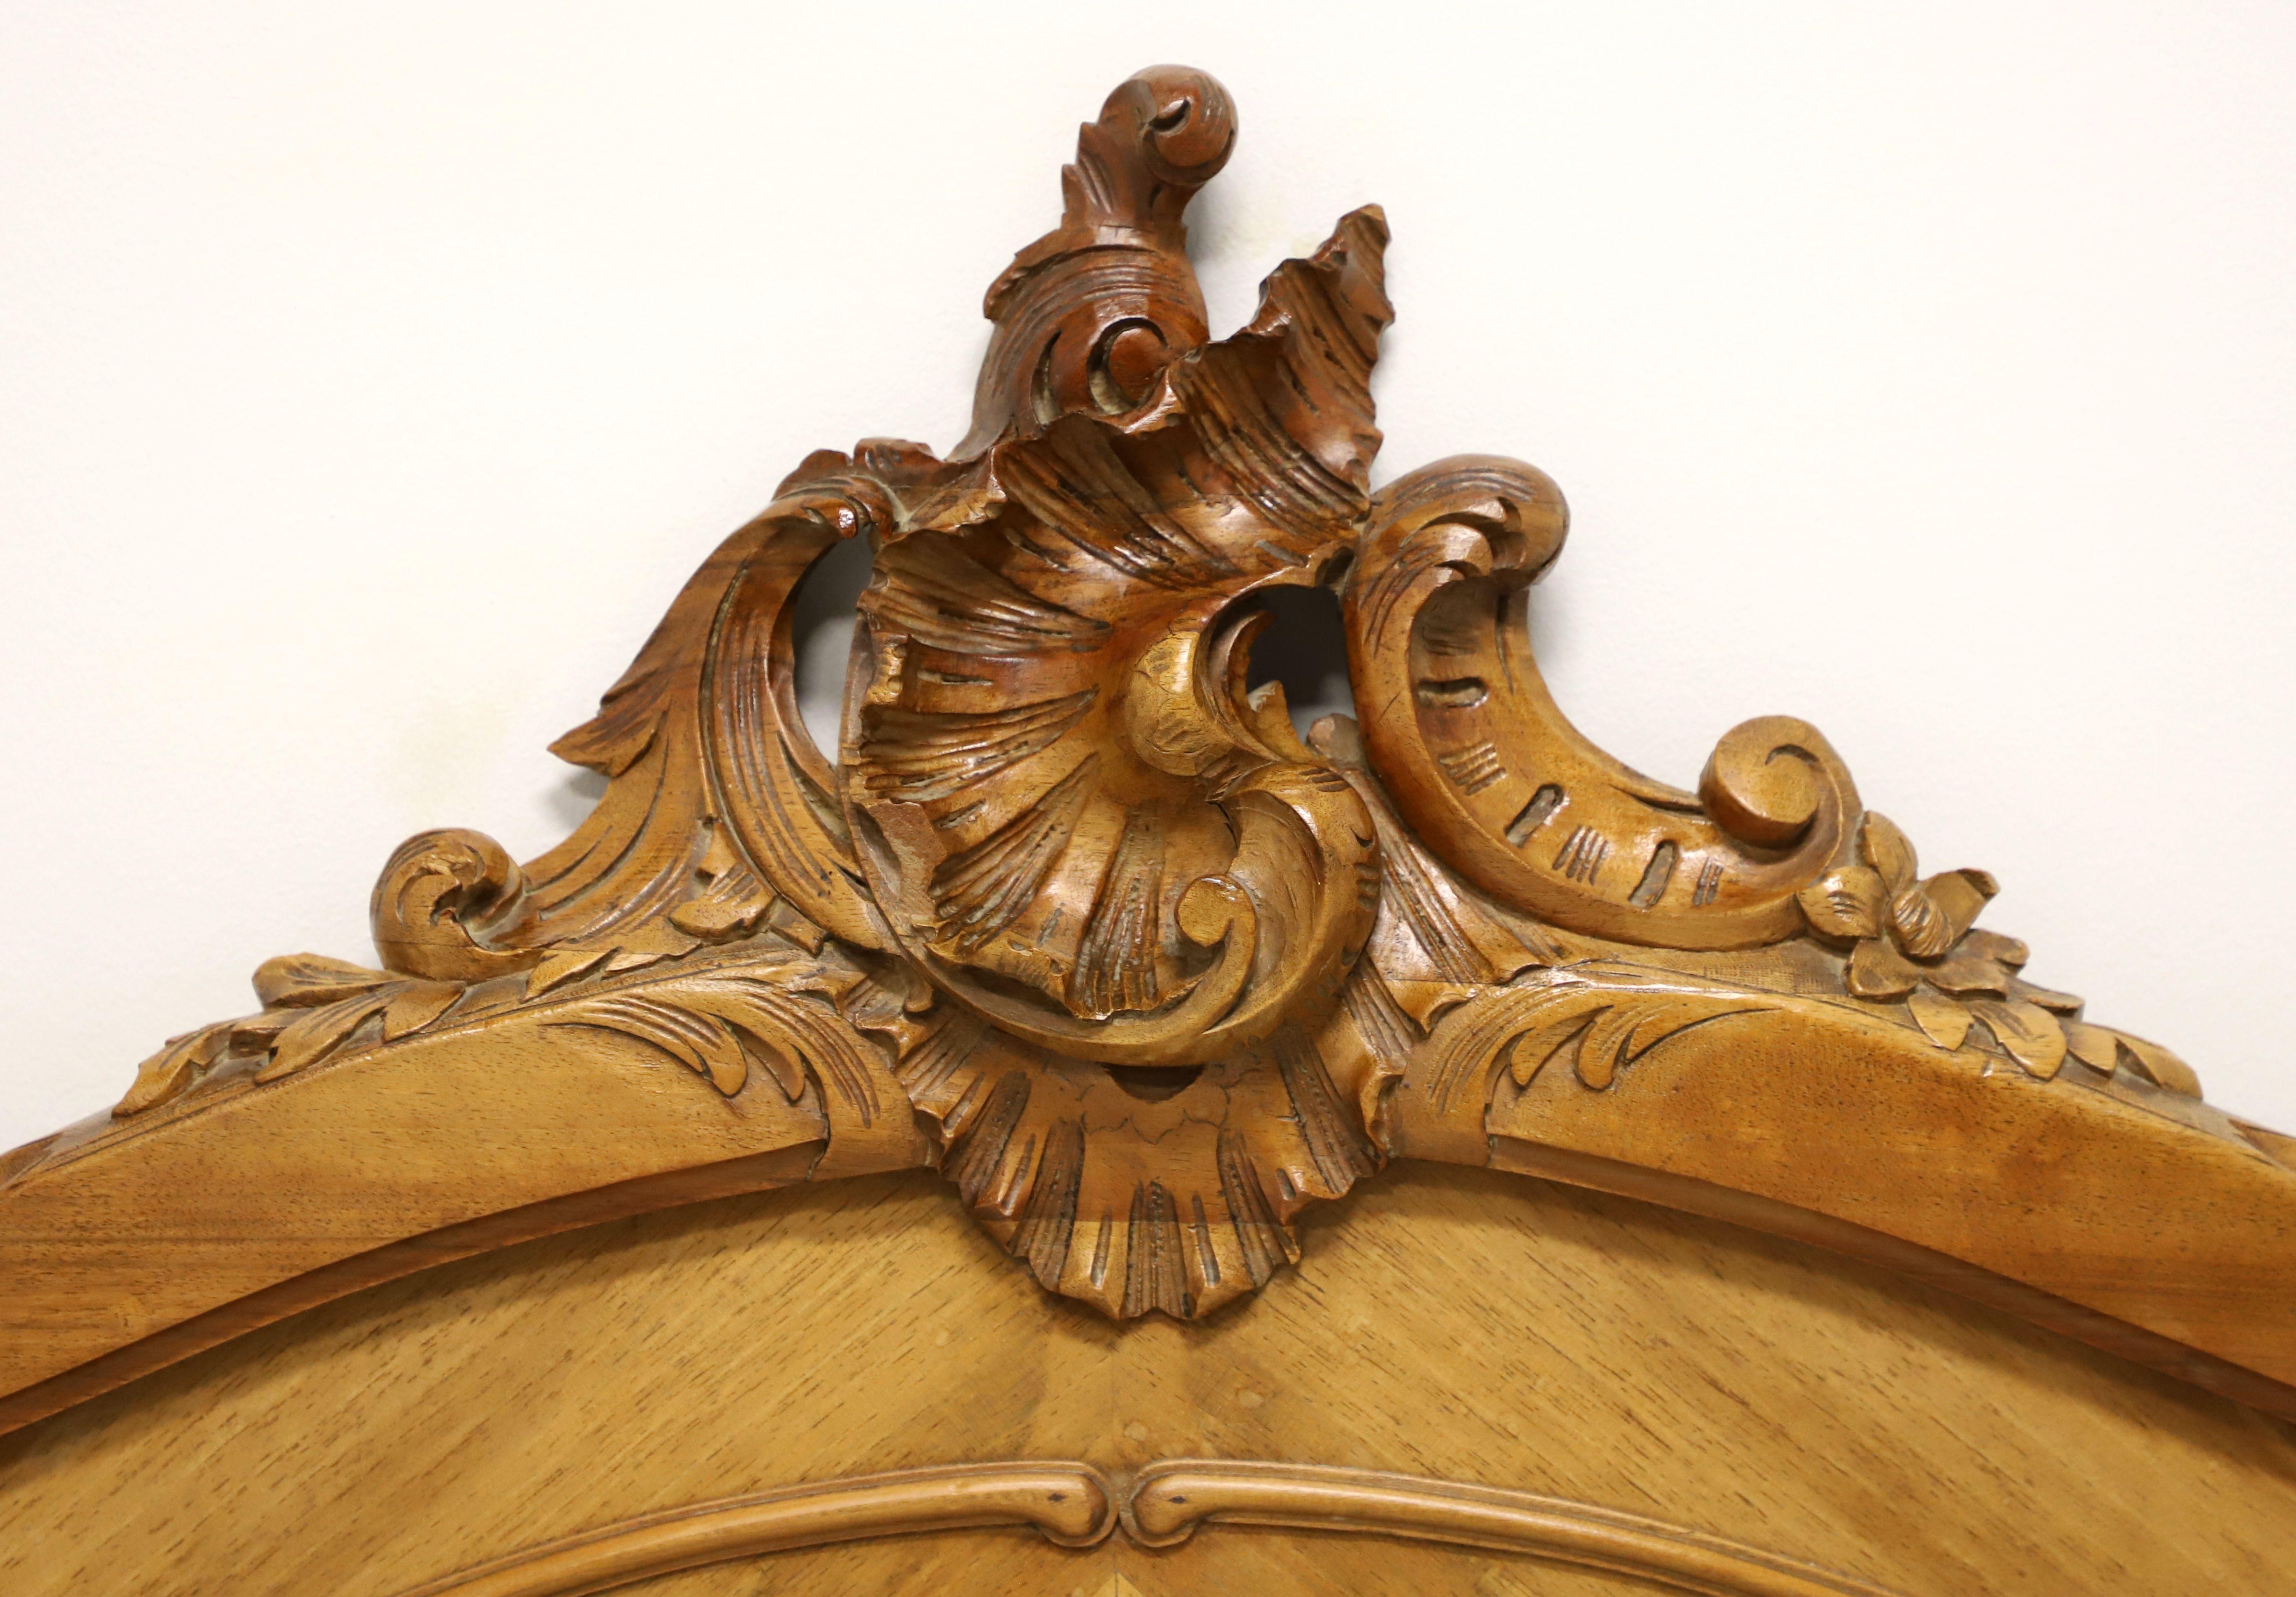 A French Provincial style full size headboard, unbranded. Walnut, or similar nutwood, with a parquetry diamond pattern, arched top with decoratively carved center foliate sheaf, and carved moldings. Made in the USA, in the mid 20th